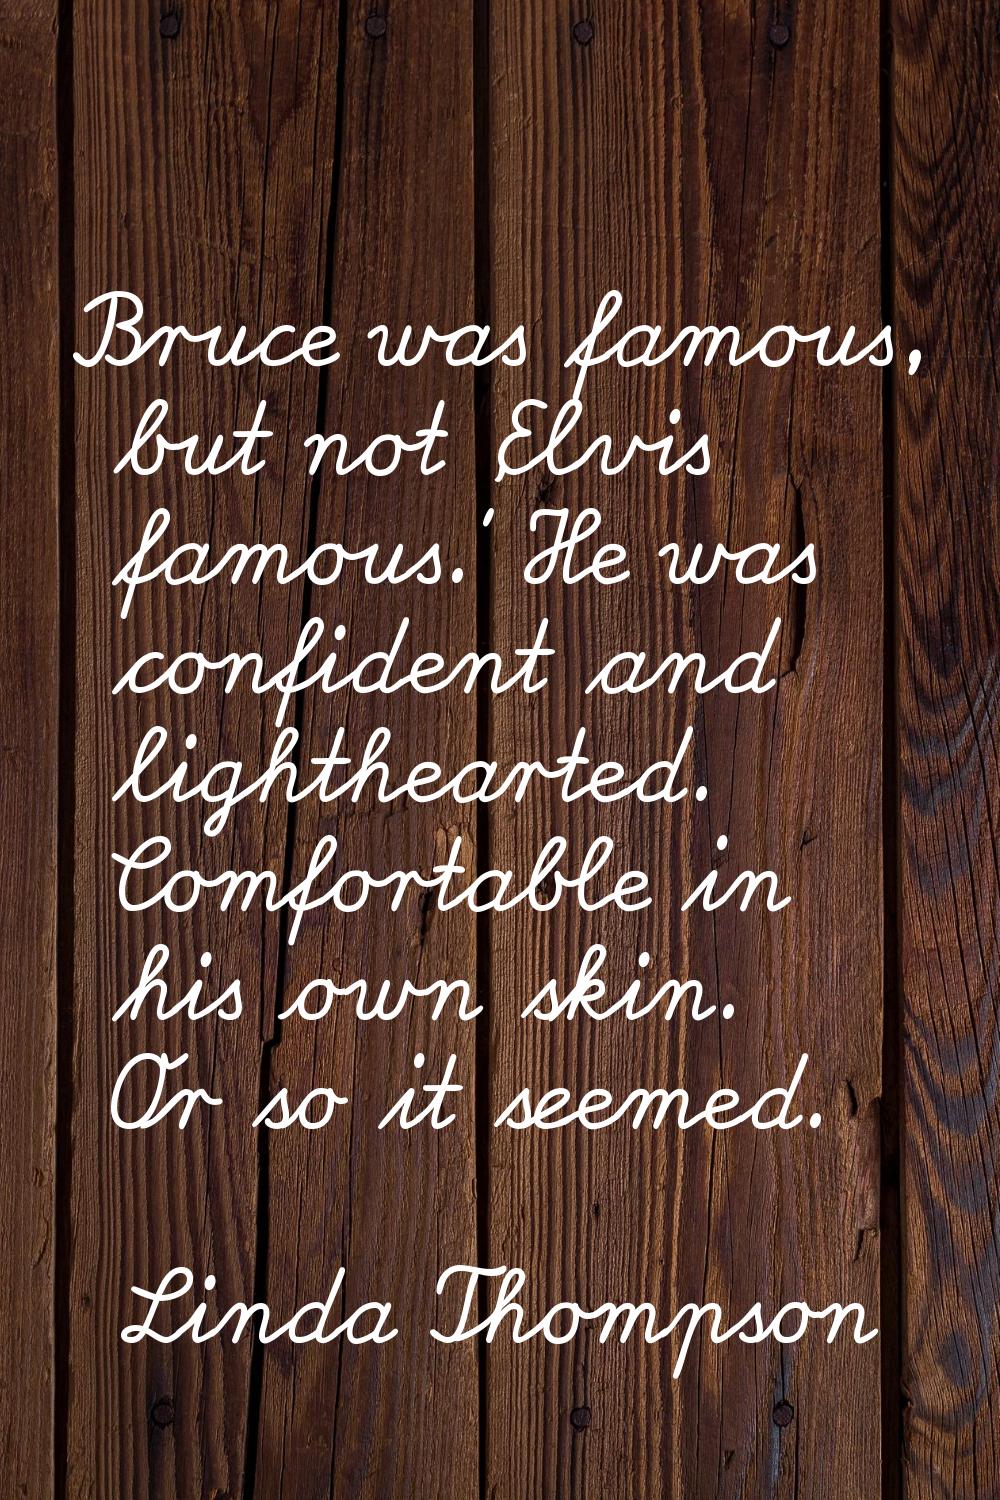 Bruce was famous, but not 'Elvis famous.' He was confident and lighthearted. Comfortable in his own